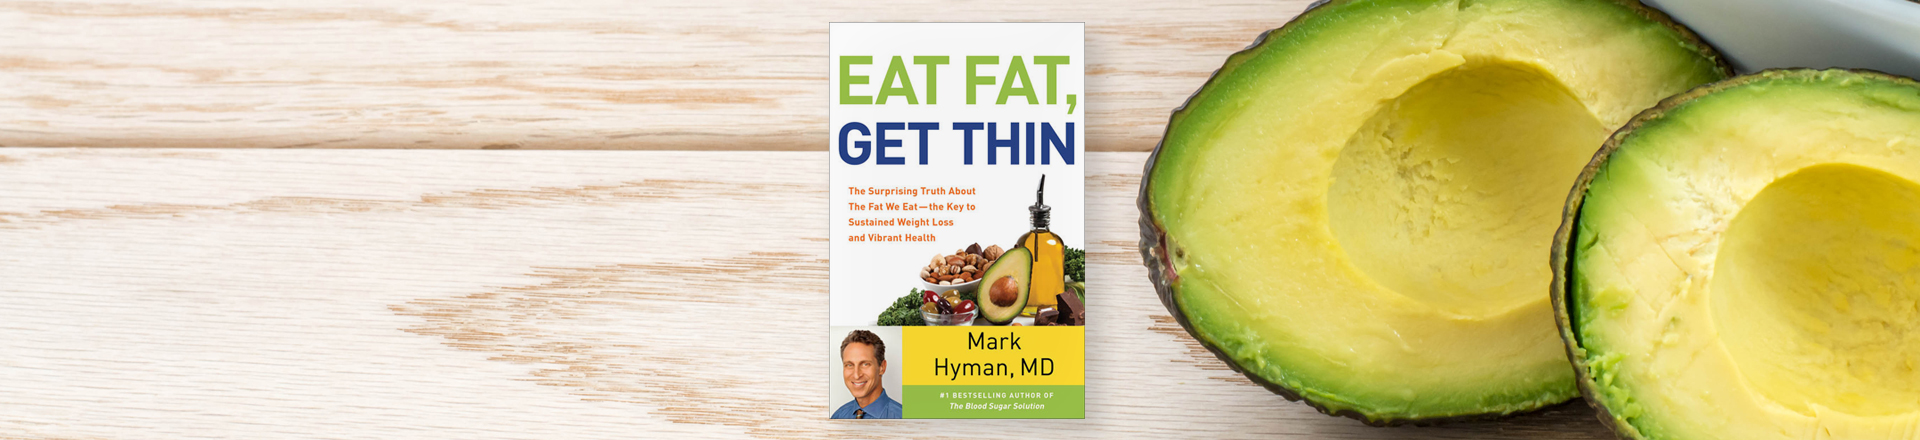 Eat healthy fats and lose weight, healthy dieting tips from Dr. Mark Hyman